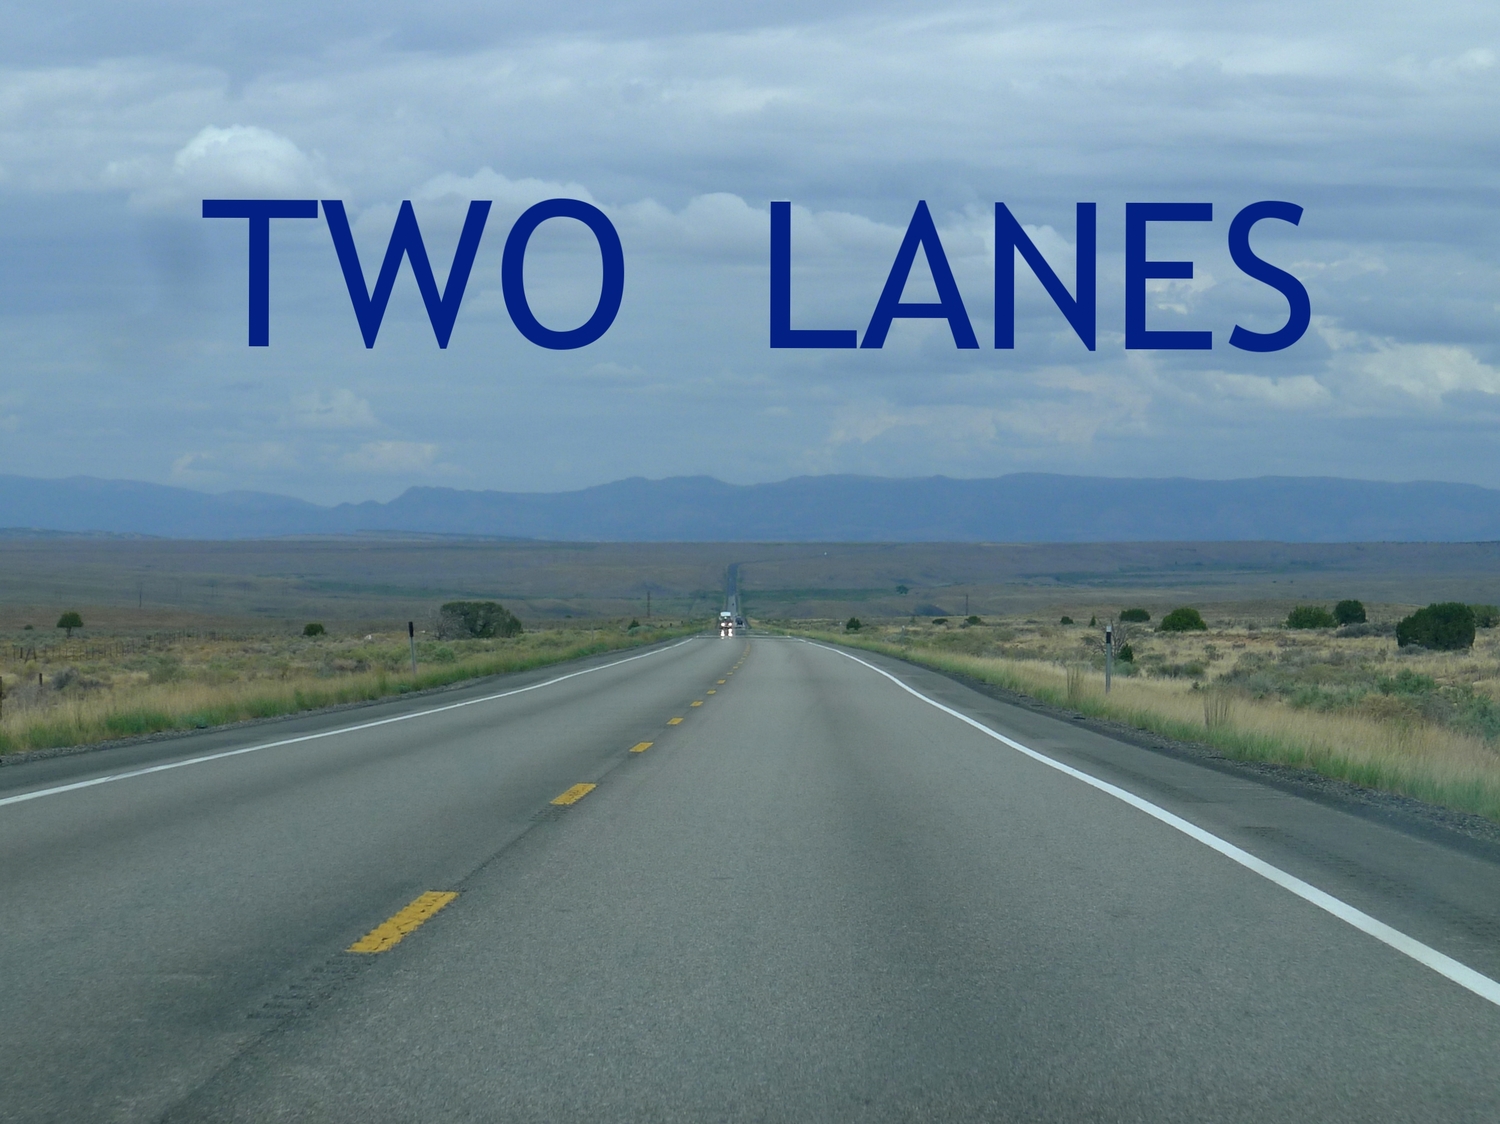 Two Lanes